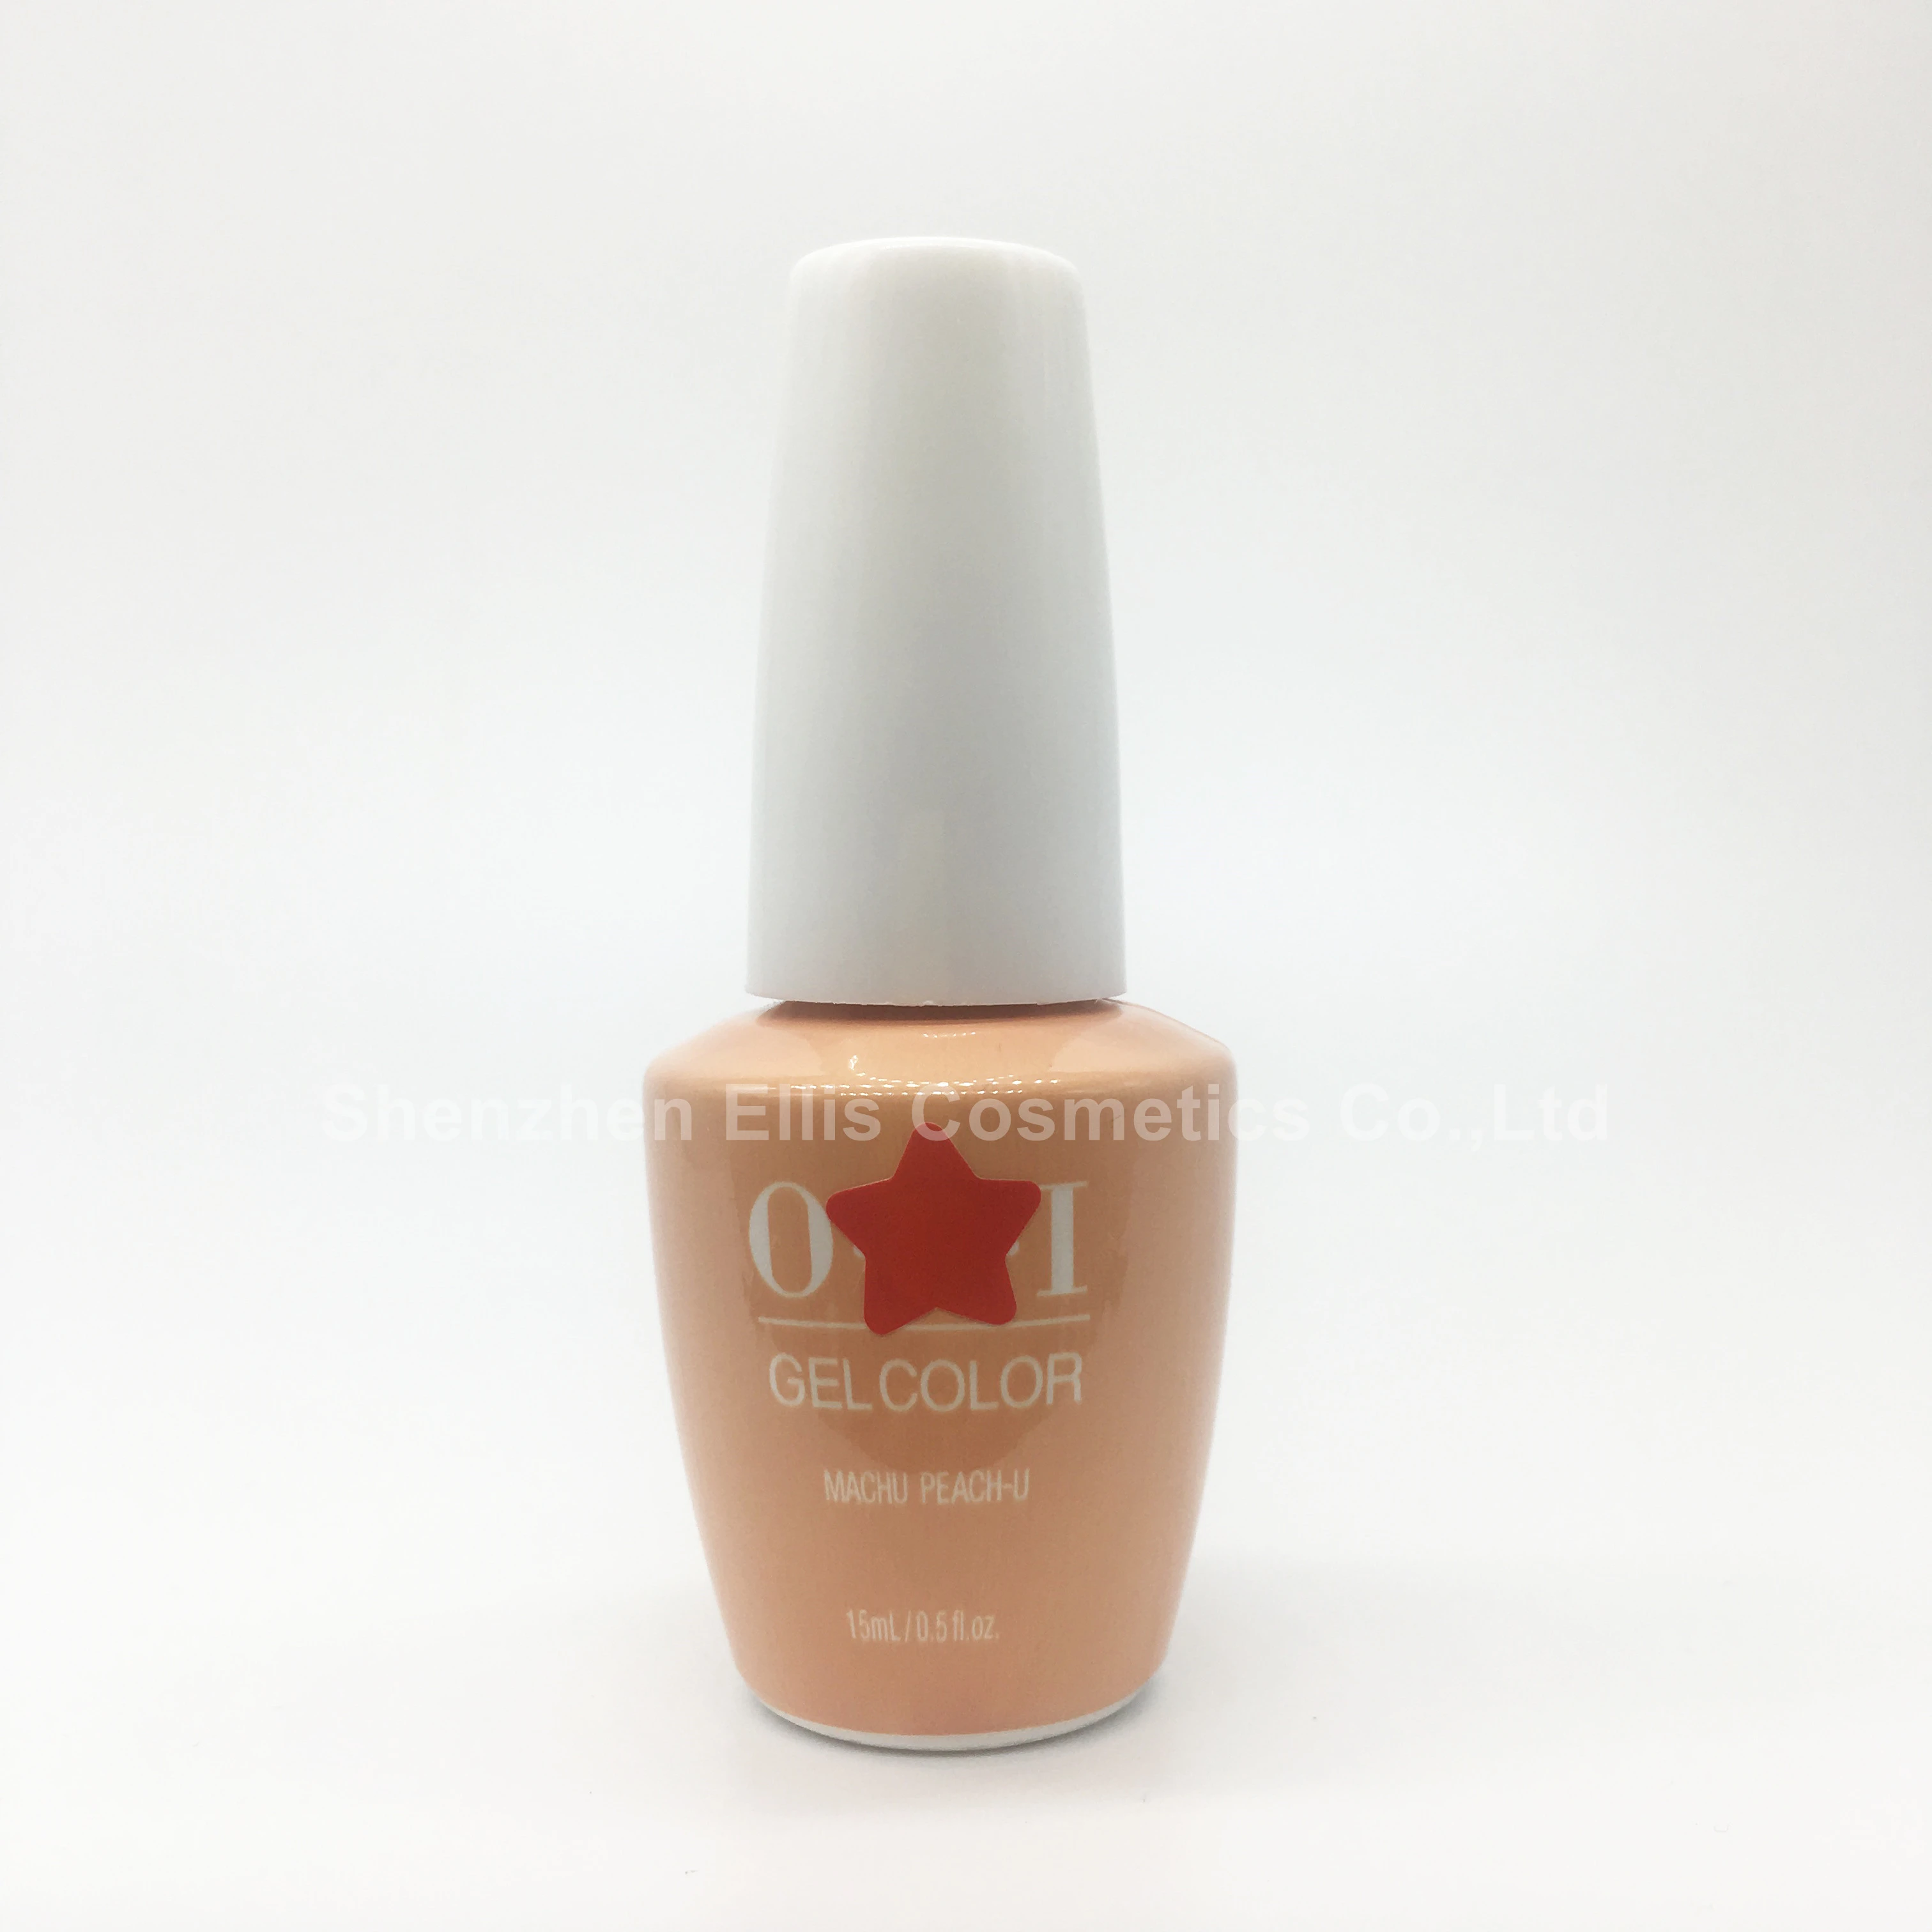 American cosmetic brands O.P Nail Gel Polish bright uv gel colors nails gel with 15ml bottles